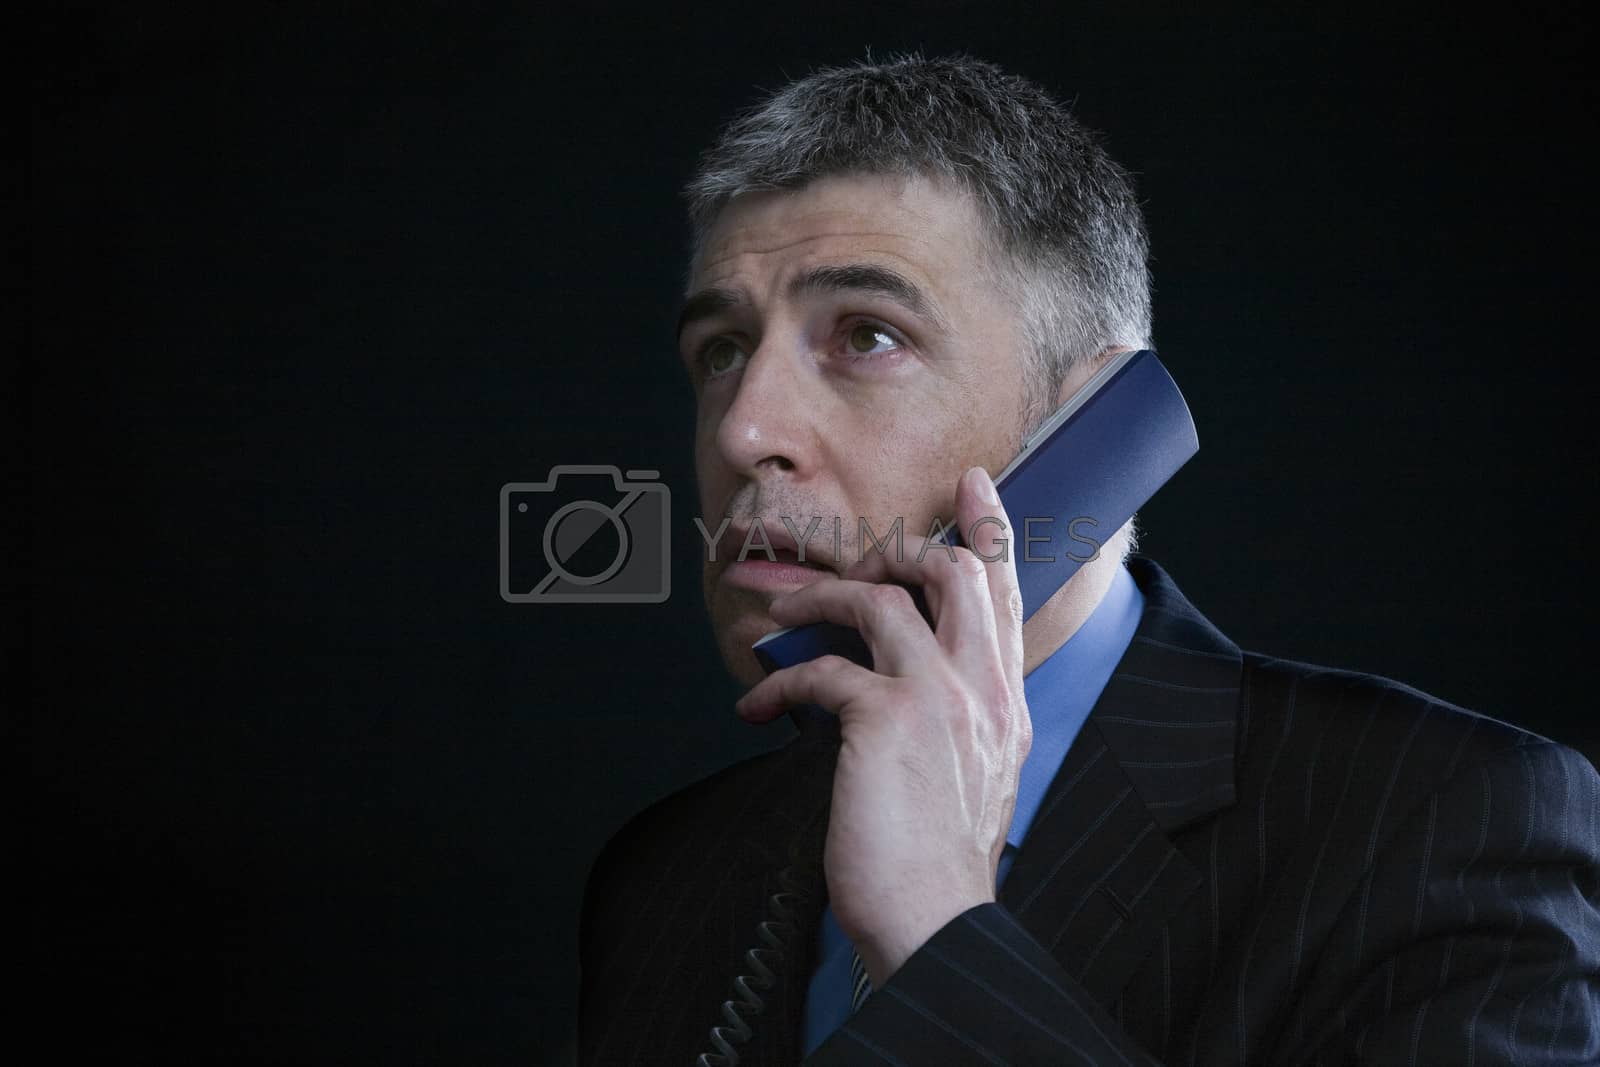 Royalty free image of Worried Businessman on the Telephone by moodboard